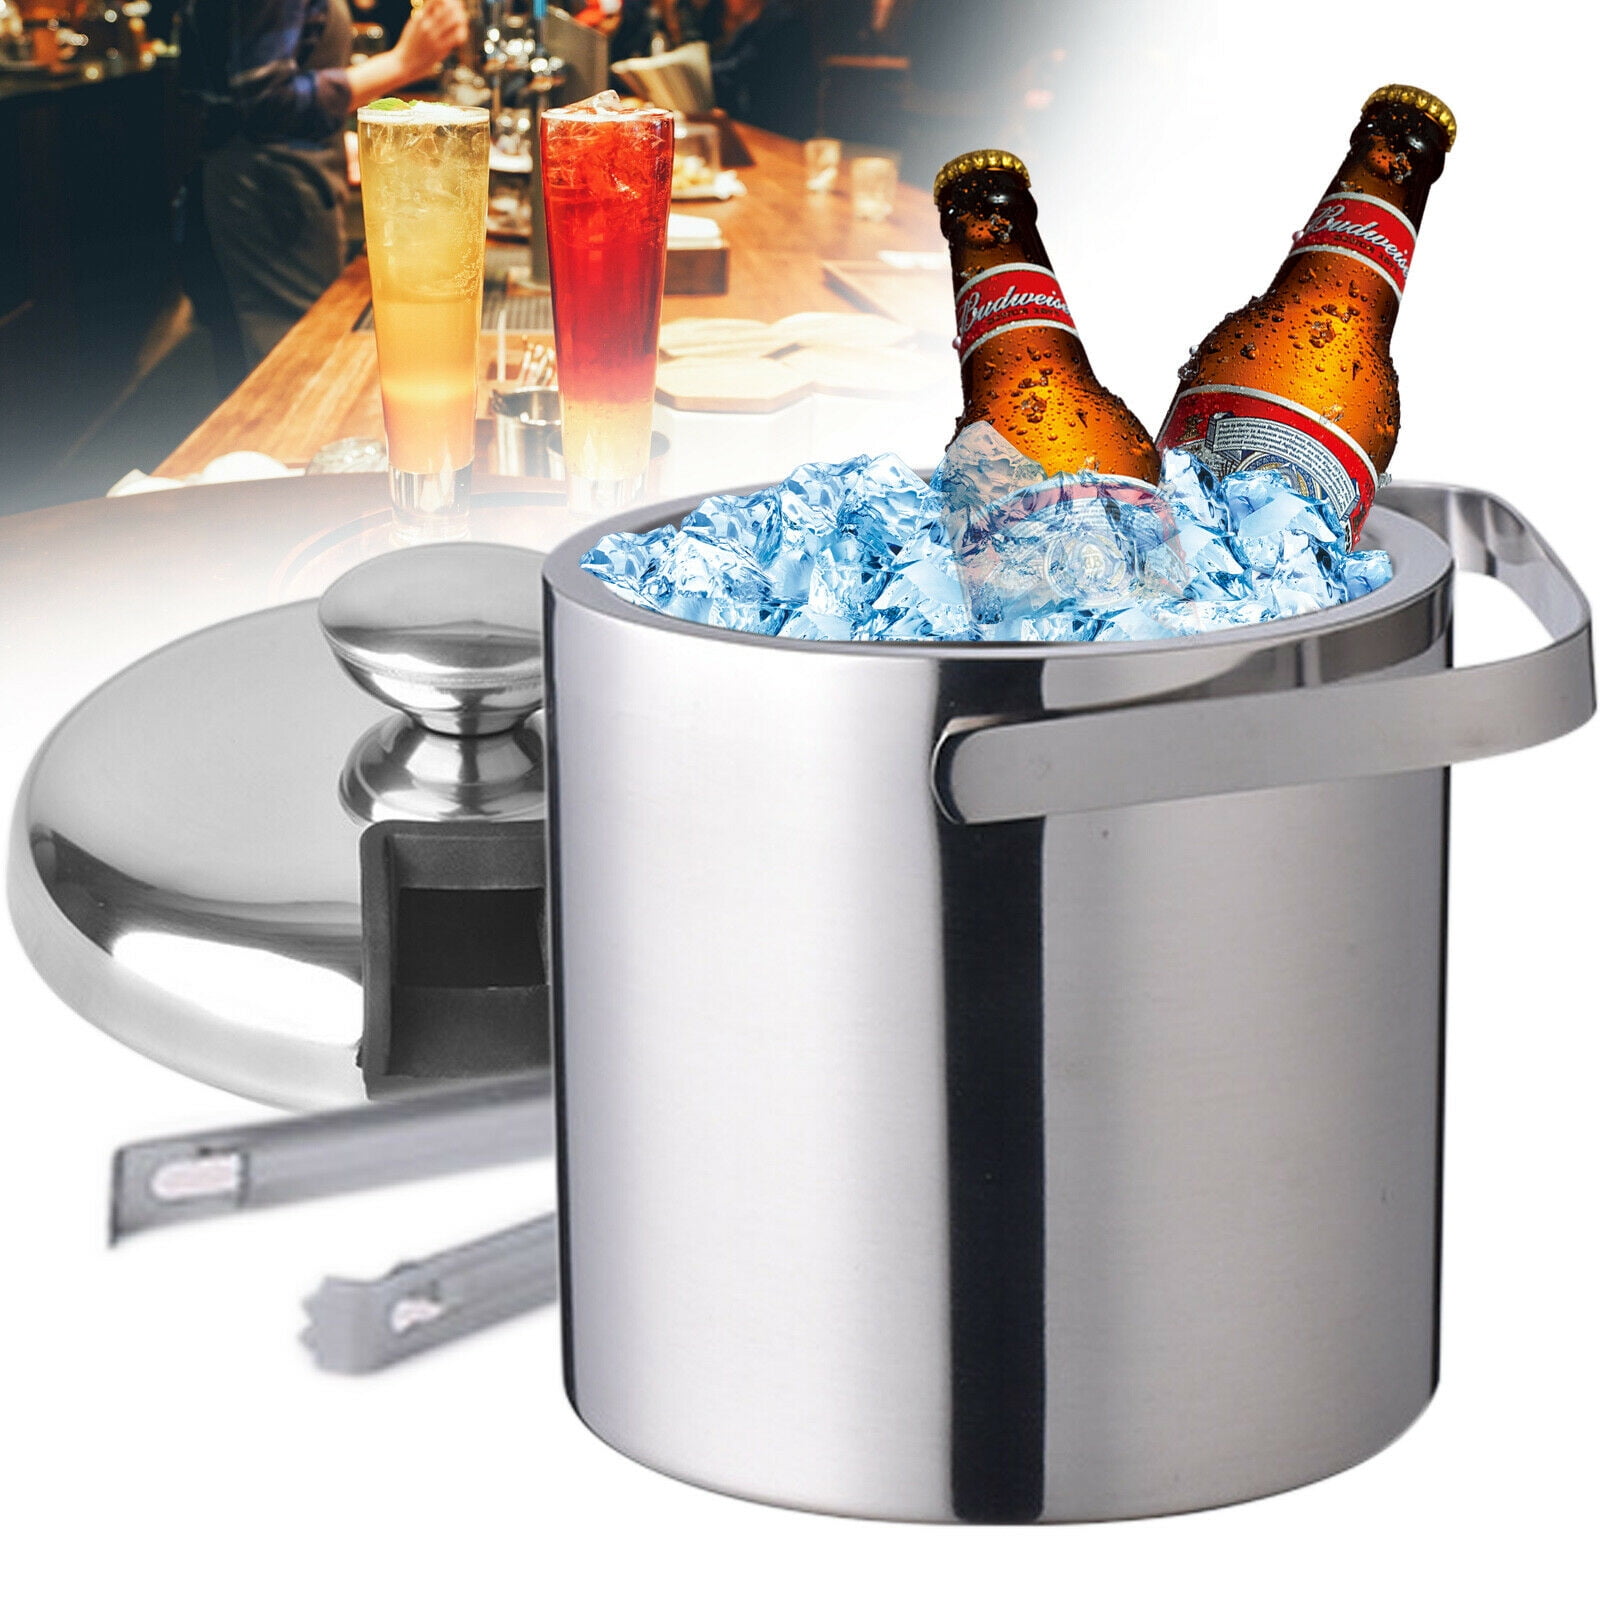 Great bar tools For home bar accessories,mini bar,Wine | Keeps Ice Cold For 6 h with Handle King International Double Walled Stainless Steel Insulated Black Ice Bucket With Lid/Ice Tong 1.75Liter 